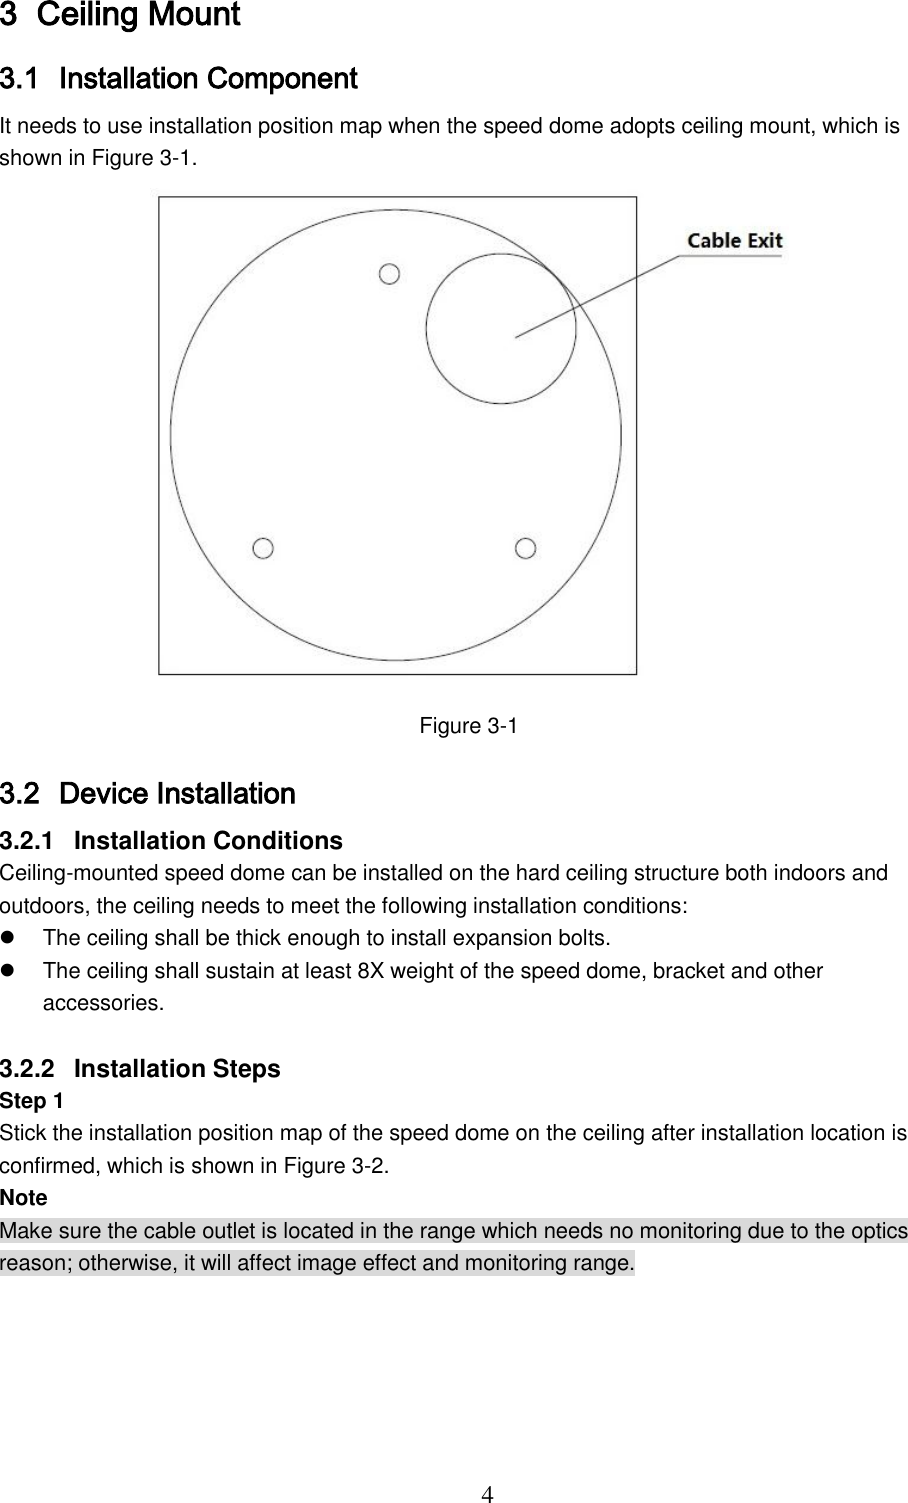  4 3 Ceiling Mount 3.1 Installation Component It needs to use installation position map when the speed dome adopts ceiling mount, which is shown in Figure 3-1.  Figure 3-1 3.2 Device Installation 3.2.1  Installation Conditions Ceiling-mounted speed dome can be installed on the hard ceiling structure both indoors and outdoors, the ceiling needs to meet the following installation conditions:   The ceiling shall be thick enough to install expansion bolts.   The ceiling shall sustain at least 8X weight of the speed dome, bracket and other accessories.  3.2.2  Installation Steps Step 1 Stick the installation position map of the speed dome on the ceiling after installation location is confirmed, which is shown in Figure 3-2. Note Make sure the cable outlet is located in the range which needs no monitoring due to the optics reason; otherwise, it will affect image effect and monitoring range. 